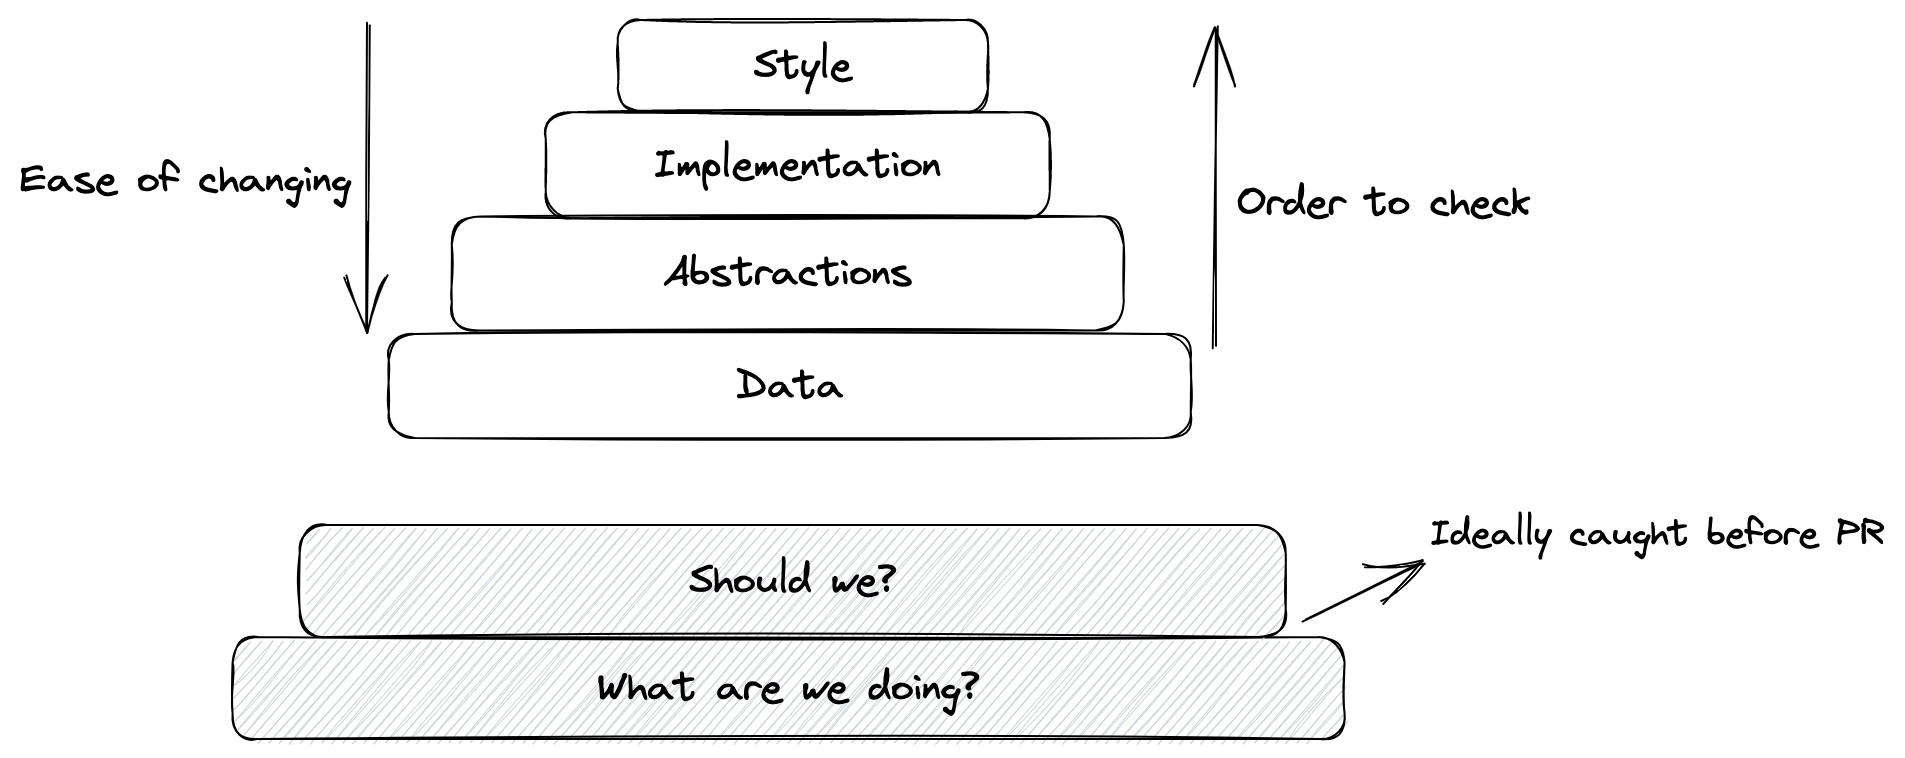 A graphic of the order in which to review pull requests. In order from the top: Style, Implementation, Abstractions, Data. There are two arrows, one from top to bottom saying "Ease of changing". The other arrow is from bottom to top saying "Order to check"